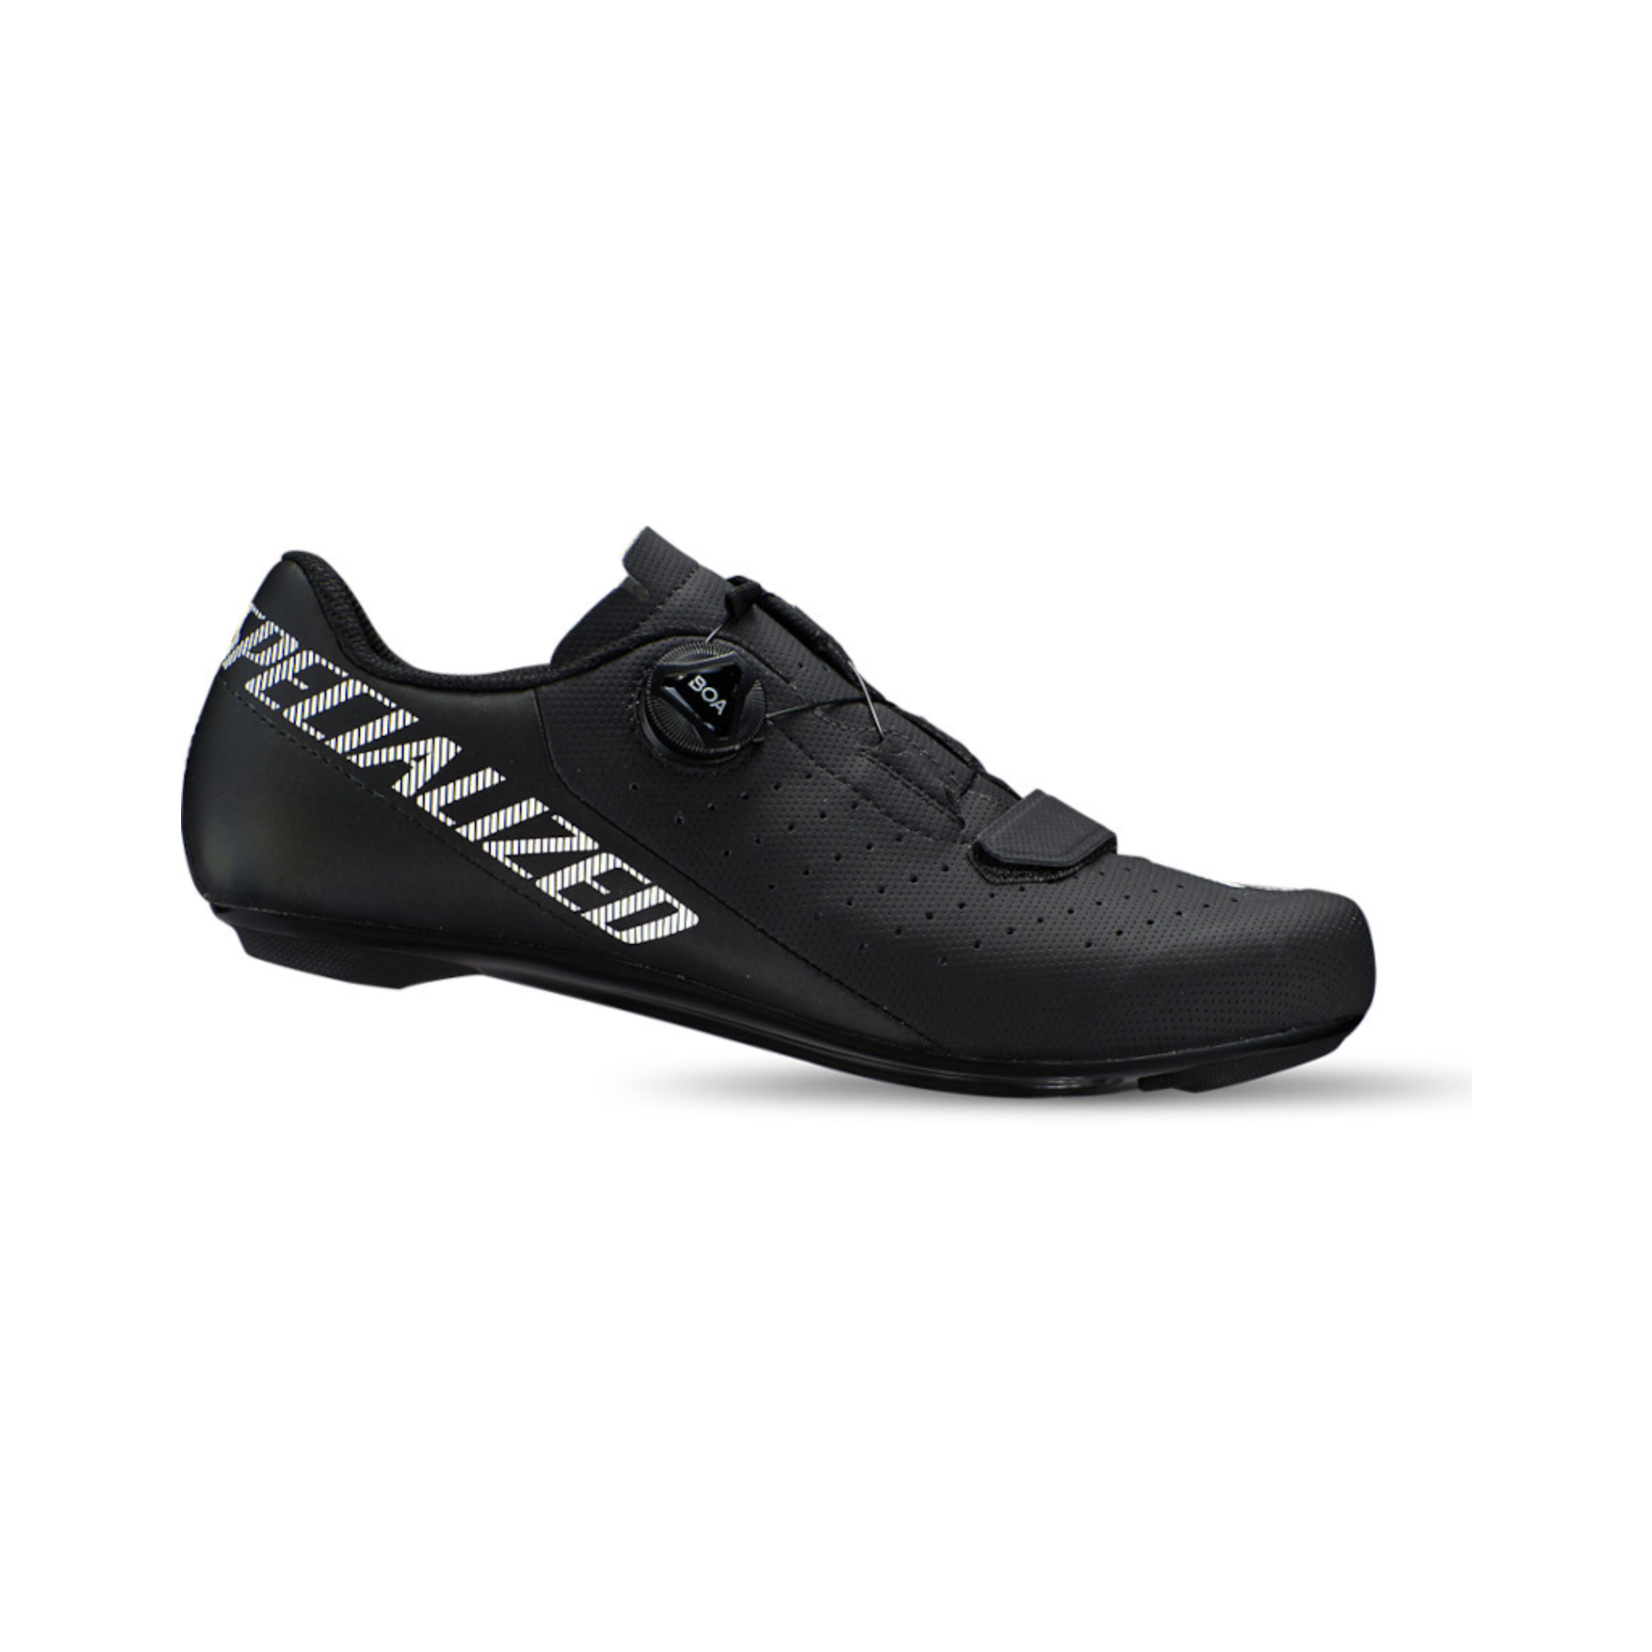 Specialized Torch 1.0 Chaussure de Route